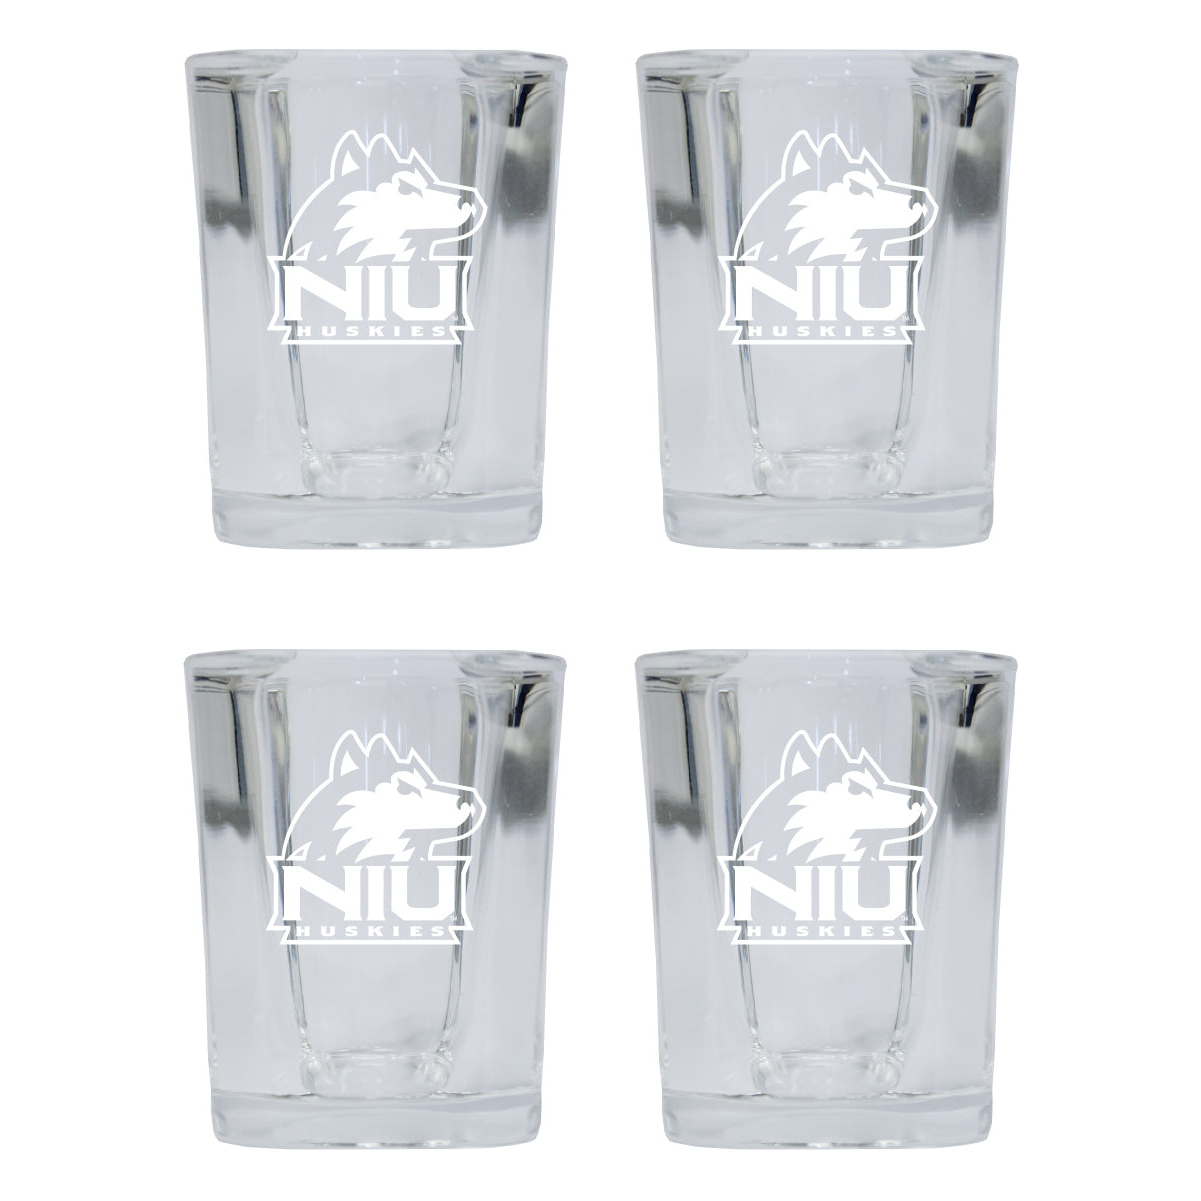 Northern Illinois Huskies 2 Ounce Square Shot Glass Laser Etched Logo Design 4-Pack